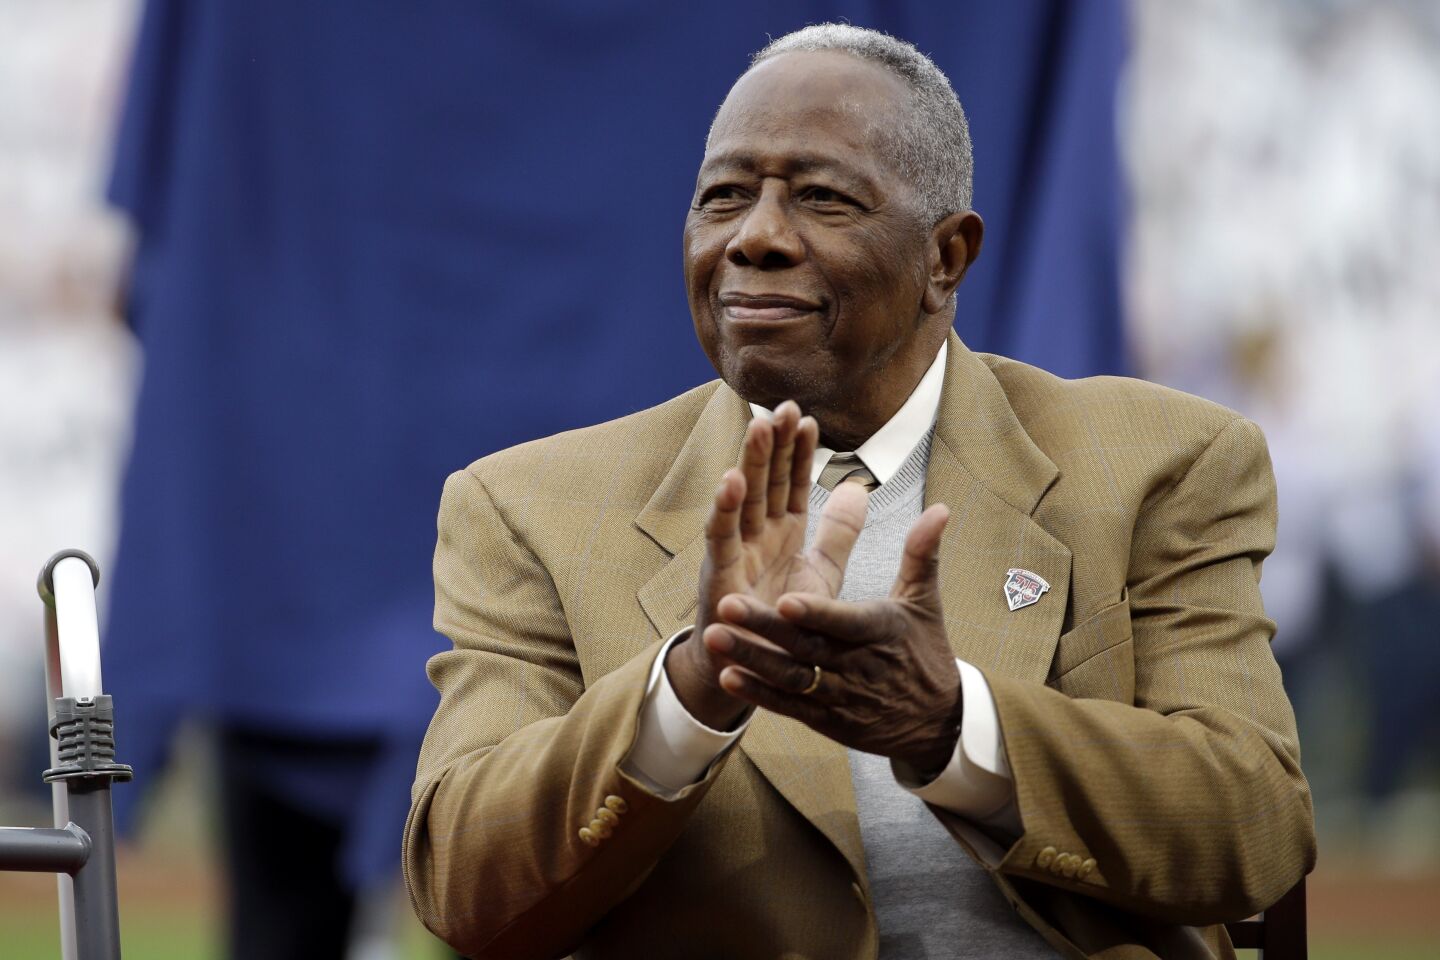 Hank Aaron applauds during a ceremony celebrating the 40th anniversary of his 715th home run